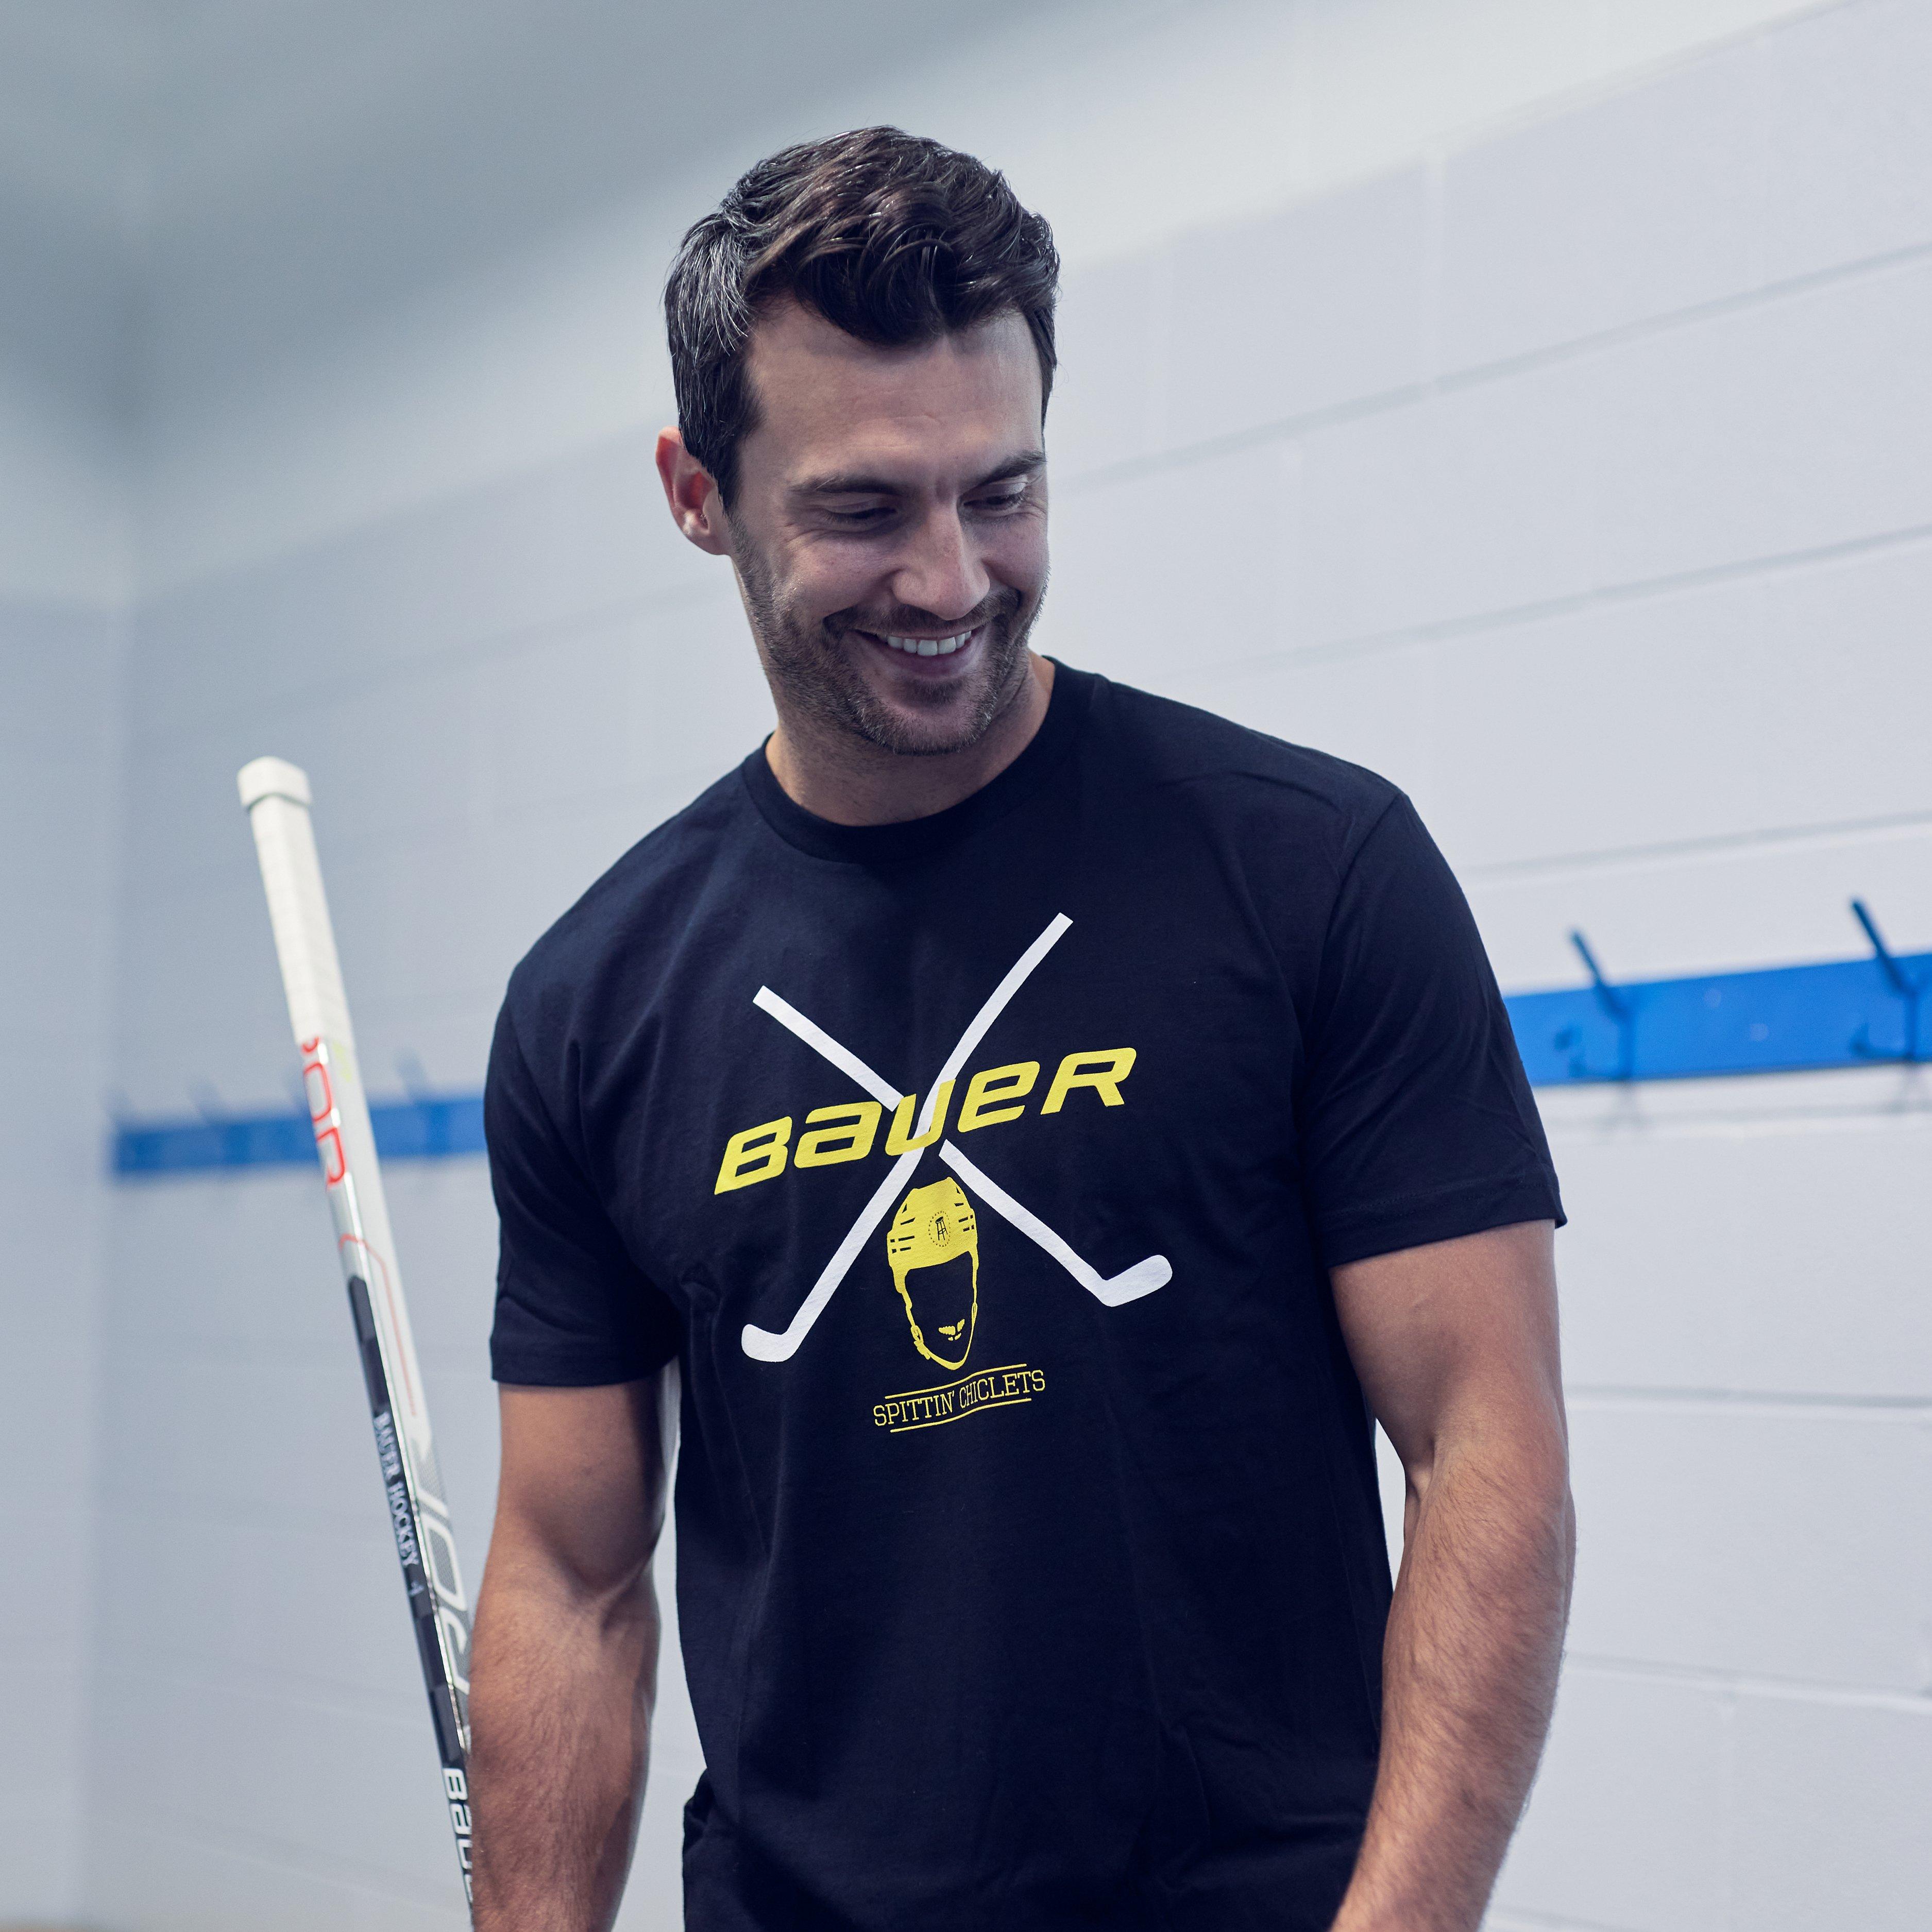 Bauer // Spittin’ Chiclets Colab Tee